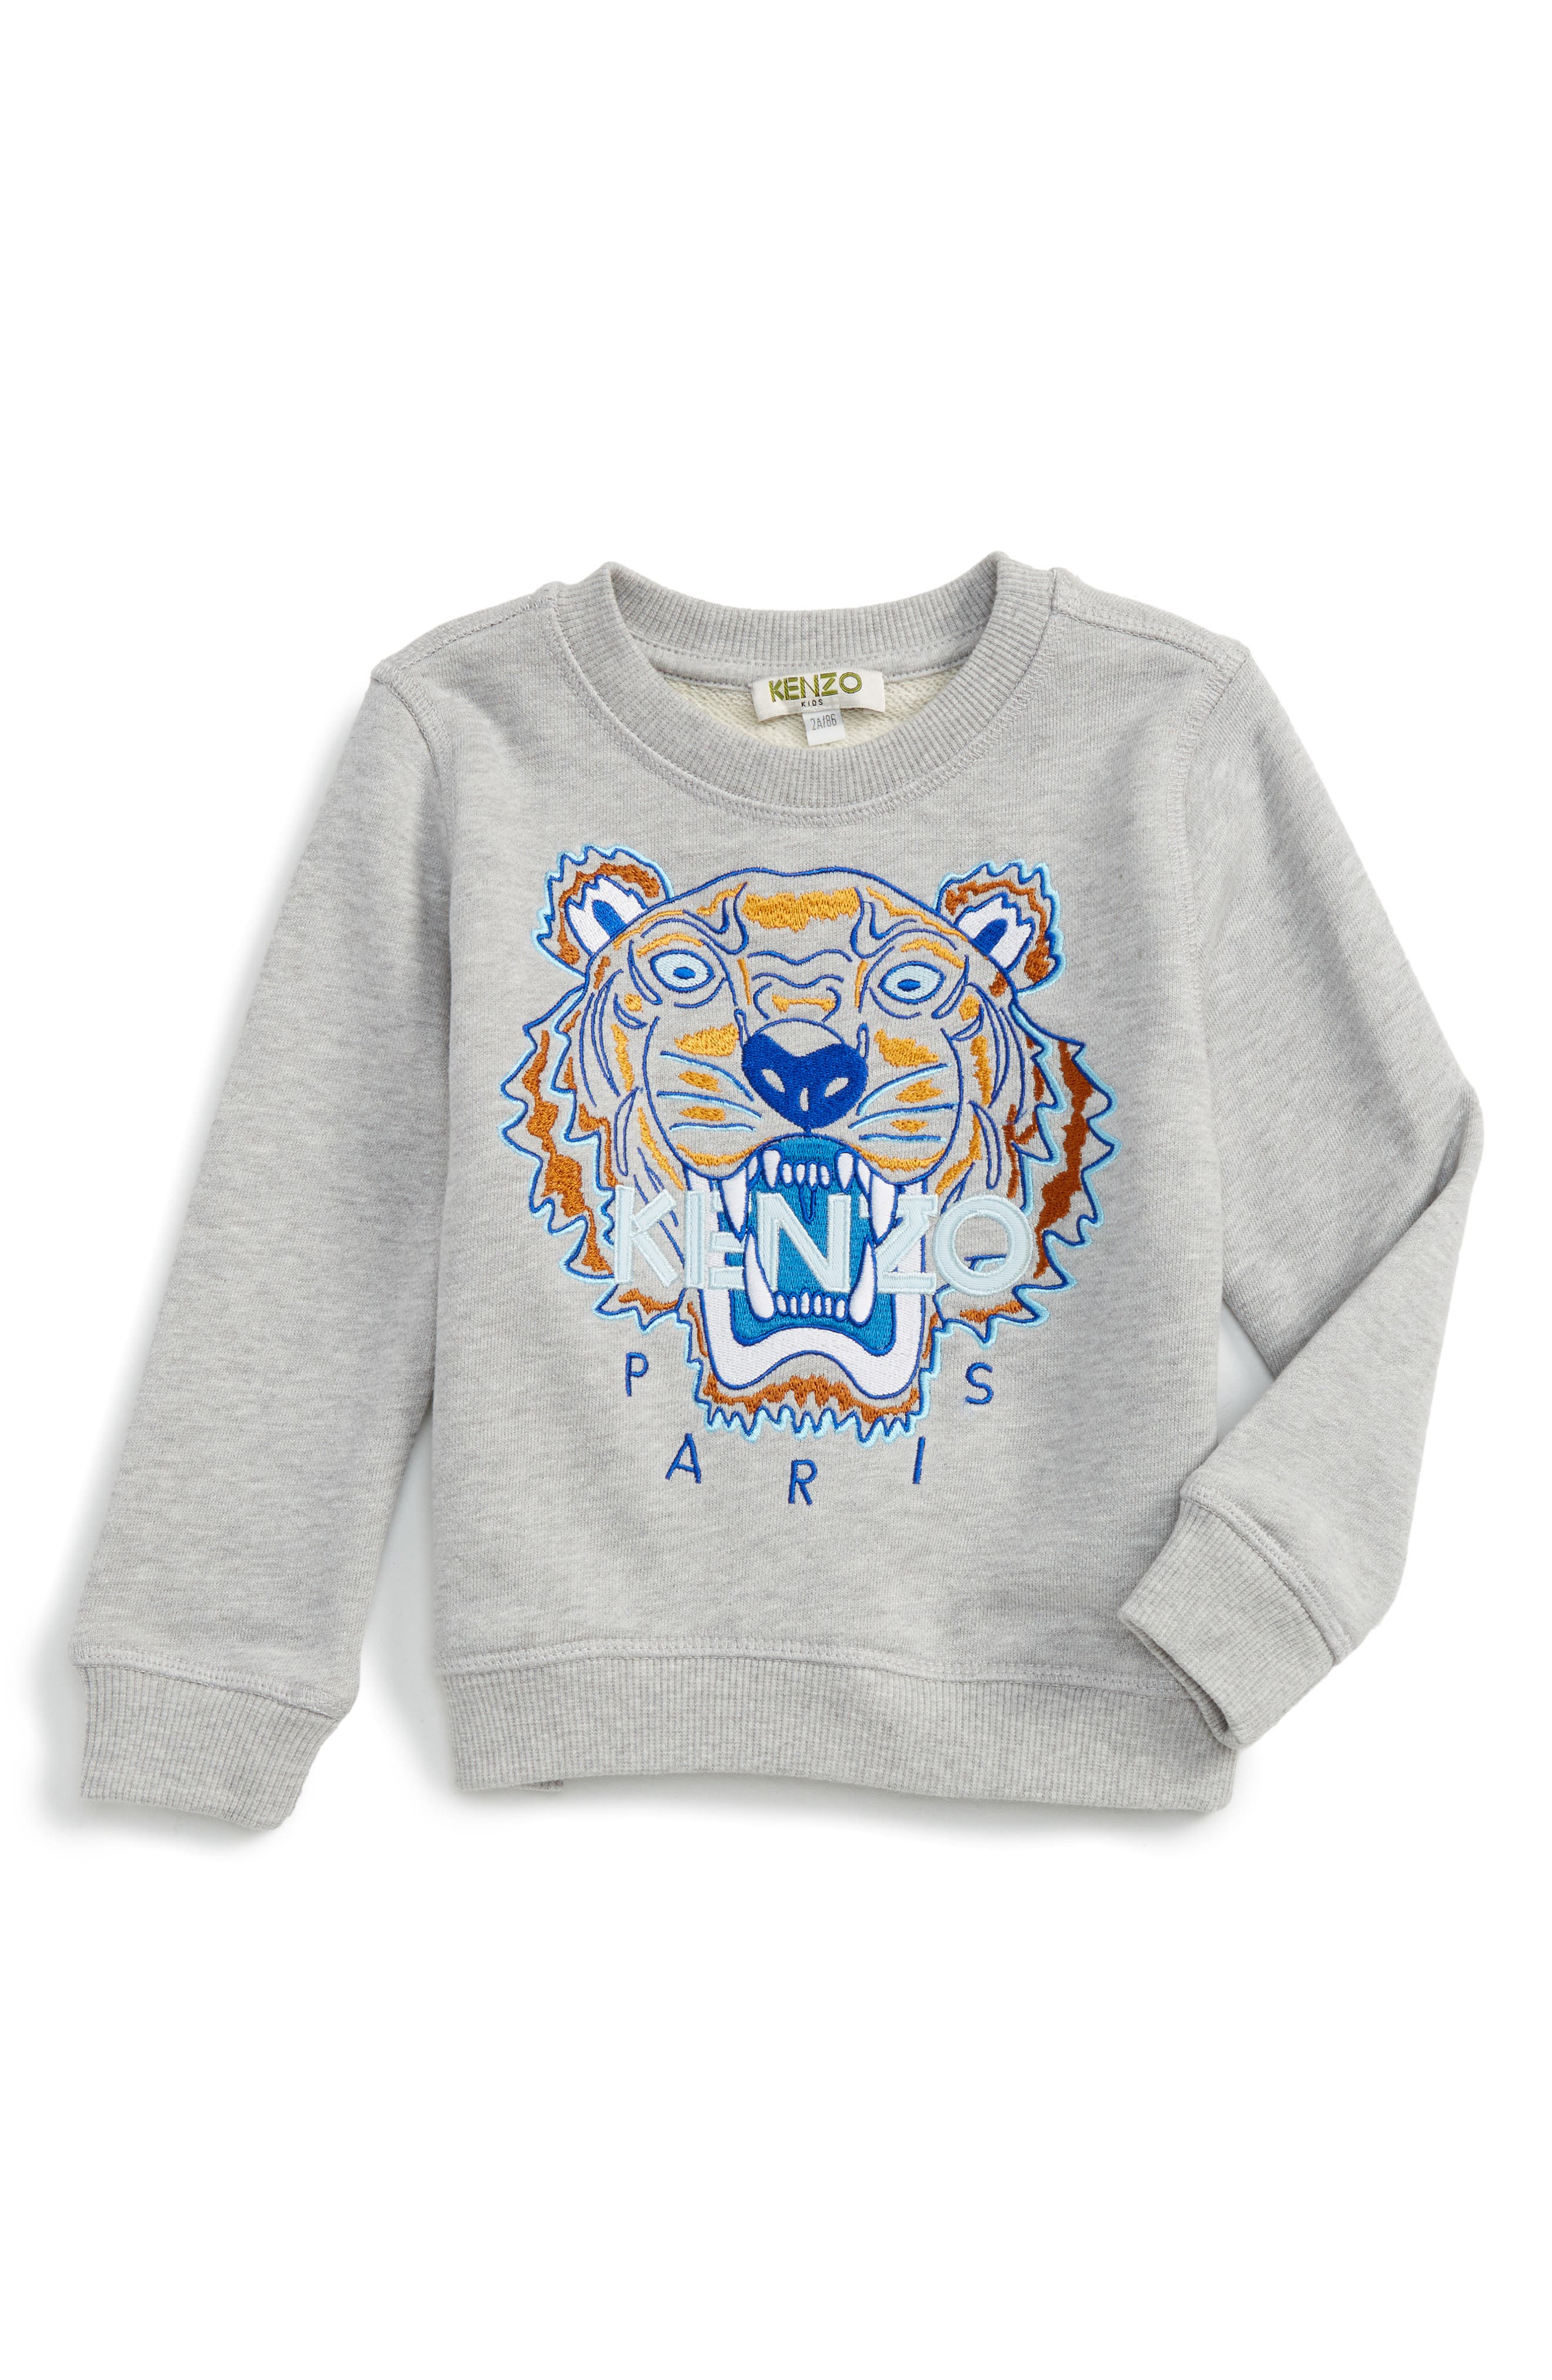 kenzo sweaters for toddlers